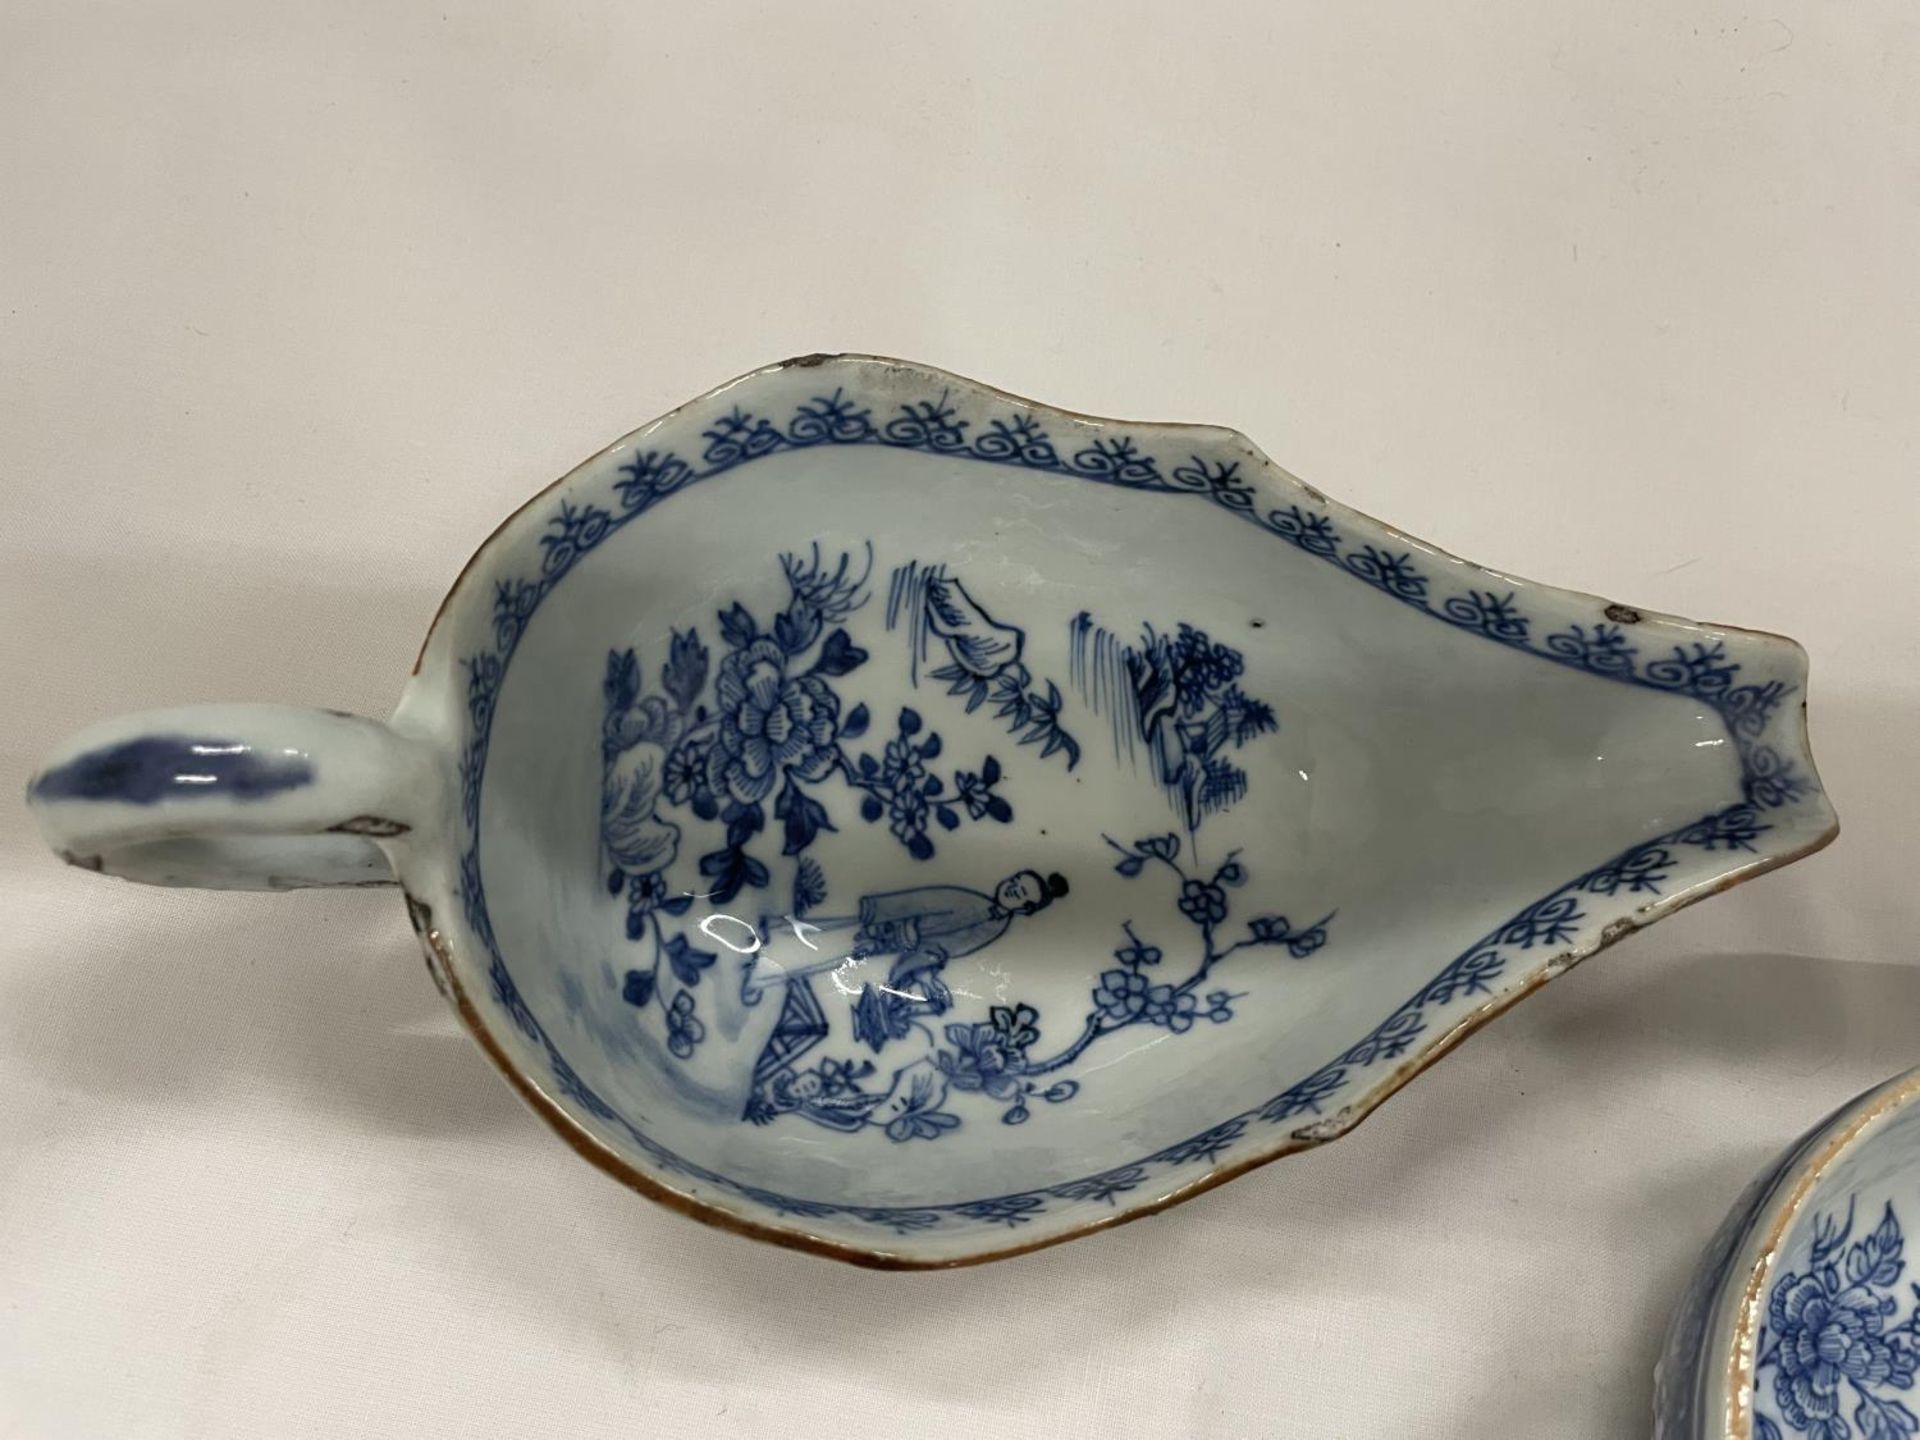 A BELIEVED TO BE LATE 18TH/EARLY 19TH CENTURY CHINESE QING DYNASTY/NANKIN BLUE AND WHITE SAUCE - Image 4 of 8